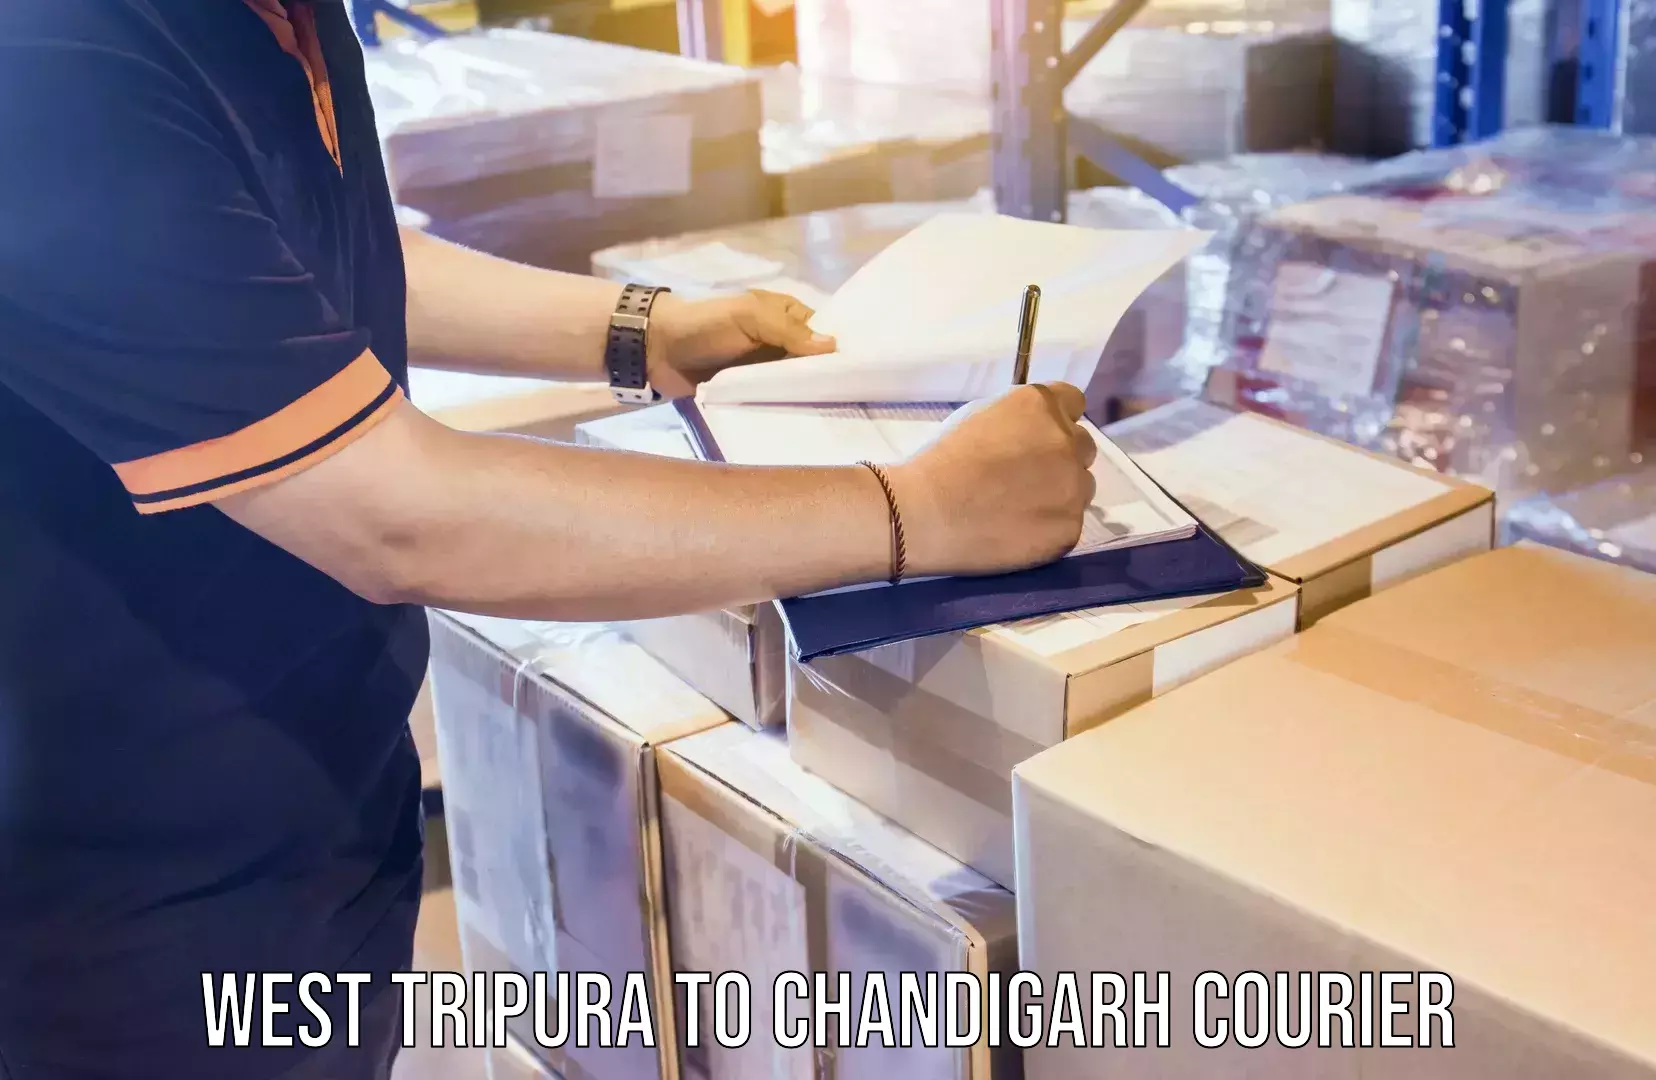 Express mail service in West Tripura to Chandigarh